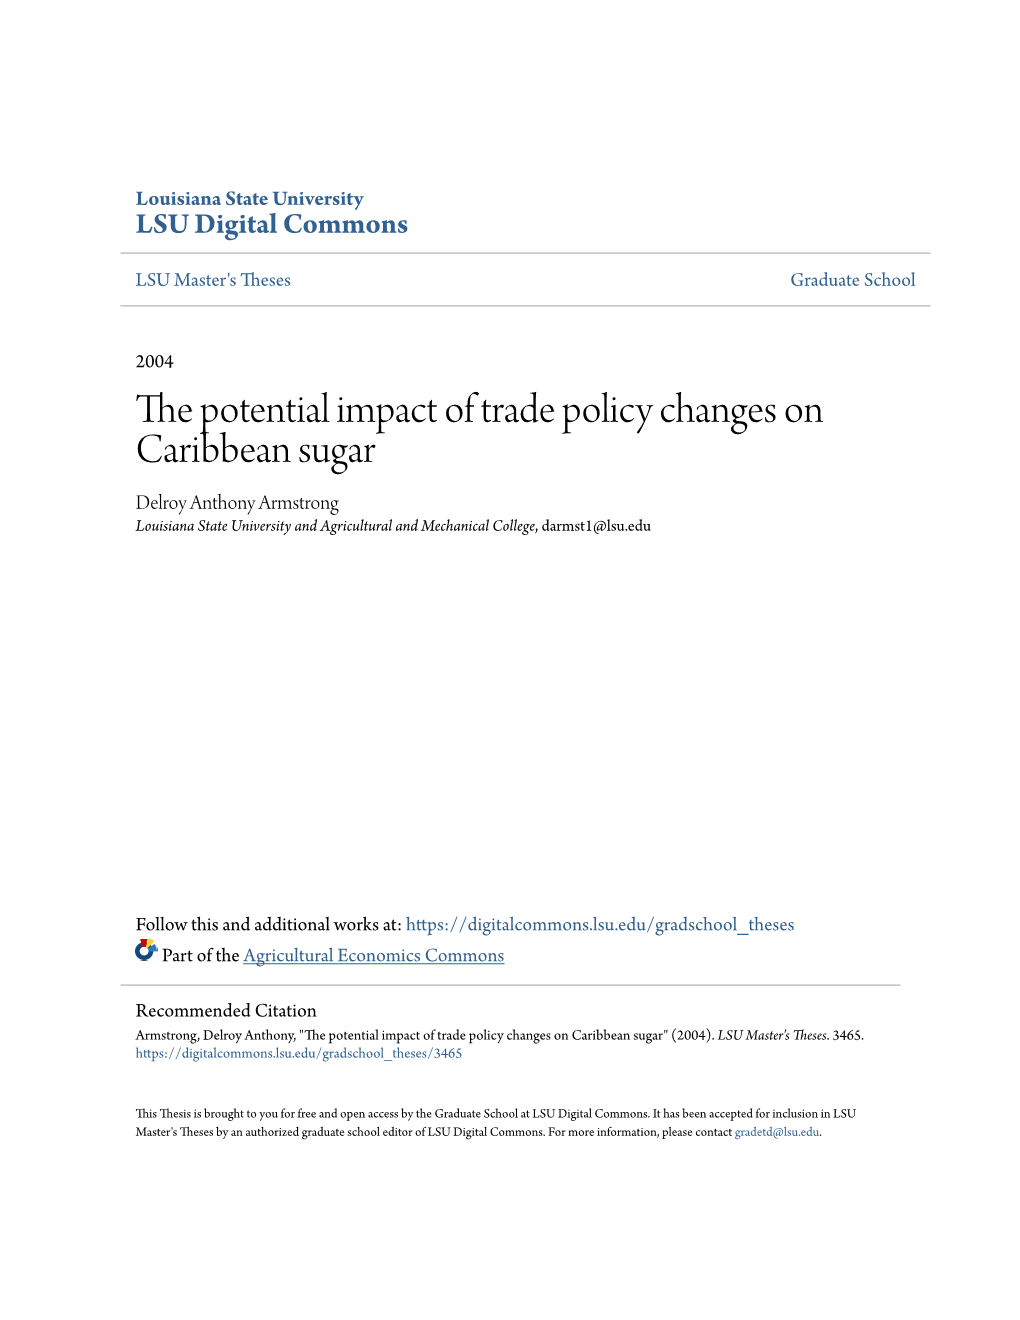 The Potential Impact of Trade Policy Changes on Caribbean Sugar